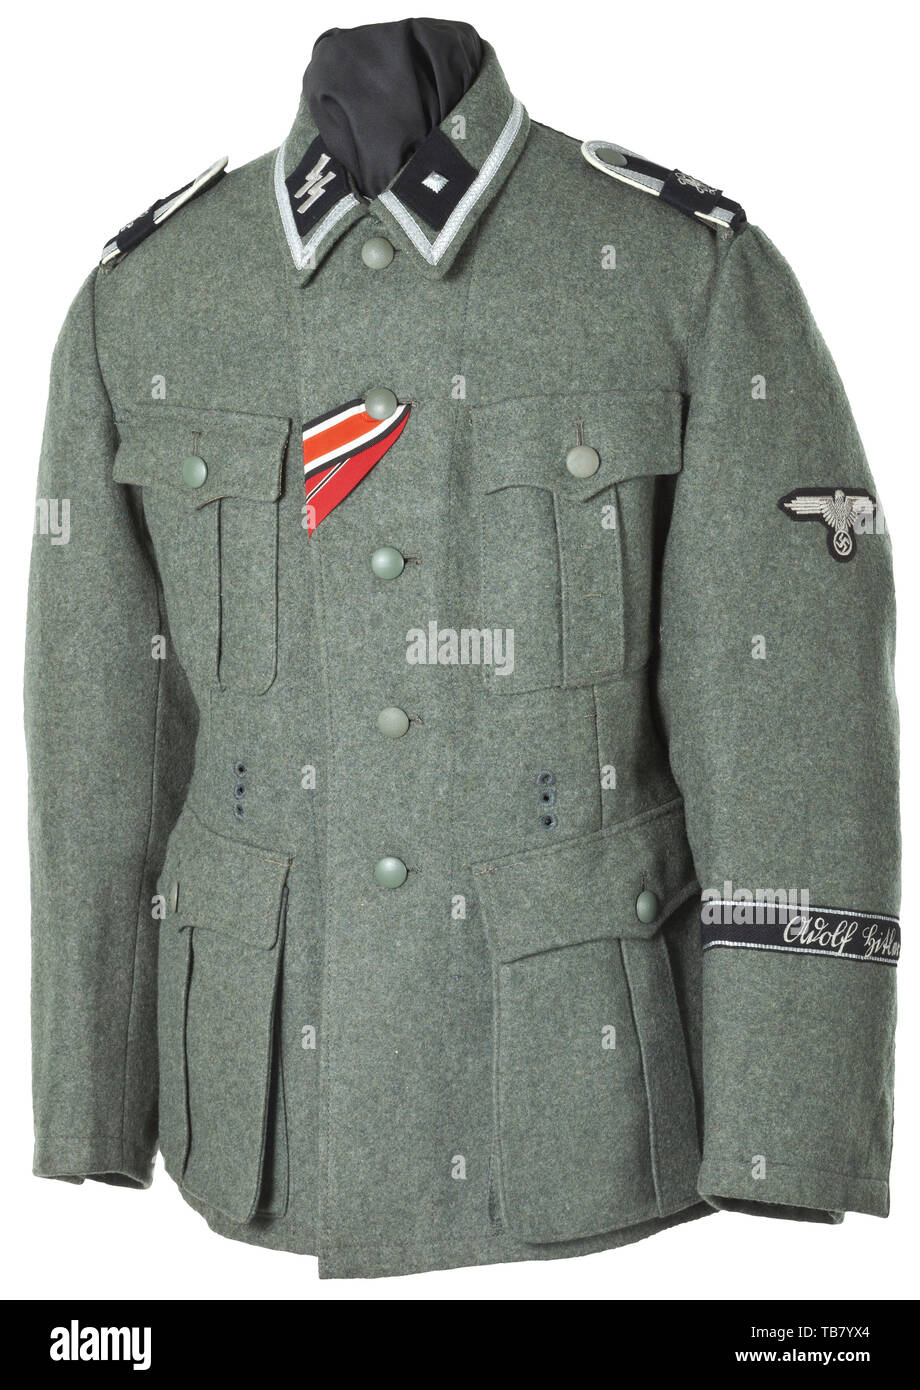 A field tunic M 40 for an Unterscharführer in the 'LAH', Field-grey cloth with five buttonholes, zinc buttons, brown inner lining with size and depot stamps, NCO braid on the collar, black collar patches with machine embroidered runes. The shoulder boards with black 'LAH' shoulder marks. The left sleeve bearing a machine sewn sleeve eagle and 'Adolf Hitler' cuff title (embroidered RZM version). Worn condition. 20th century, 1930s, 1940s, Waffen-SS, armed division of the SS, armed service, armed services, NS, National Socialism, Nazism, Third Reich, German Reich, Germany, mi, Editorial-Use-Only Stock Photo